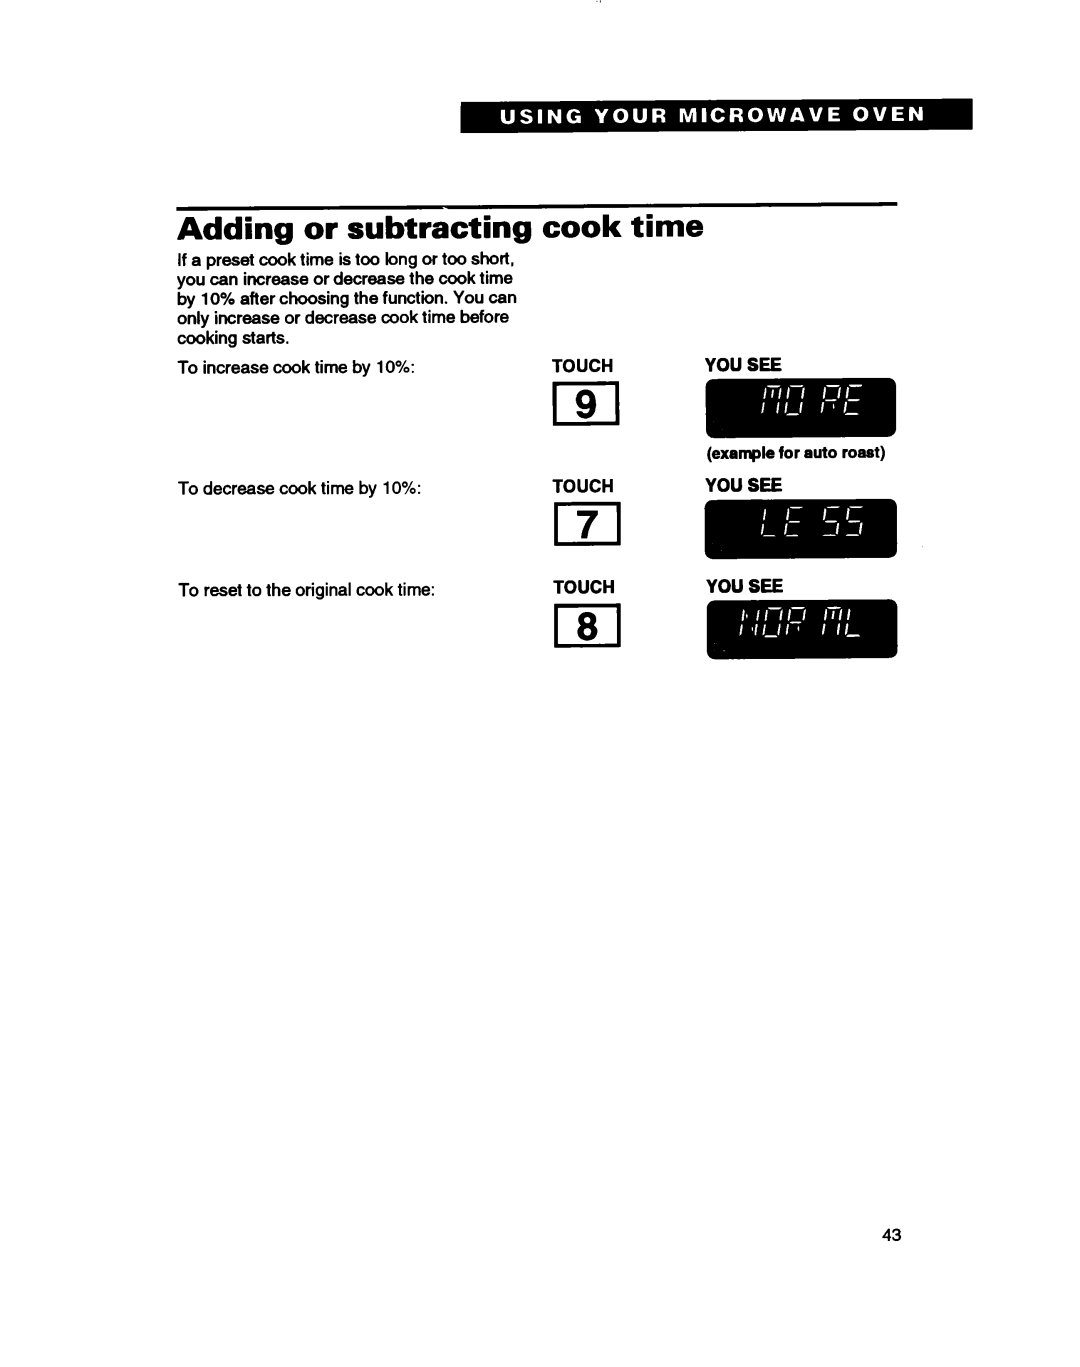 Whirlpool MH7115XB Adding or subtracting cook time, To increase cook time by 10%, To decrease cook time by 10%, Touch 